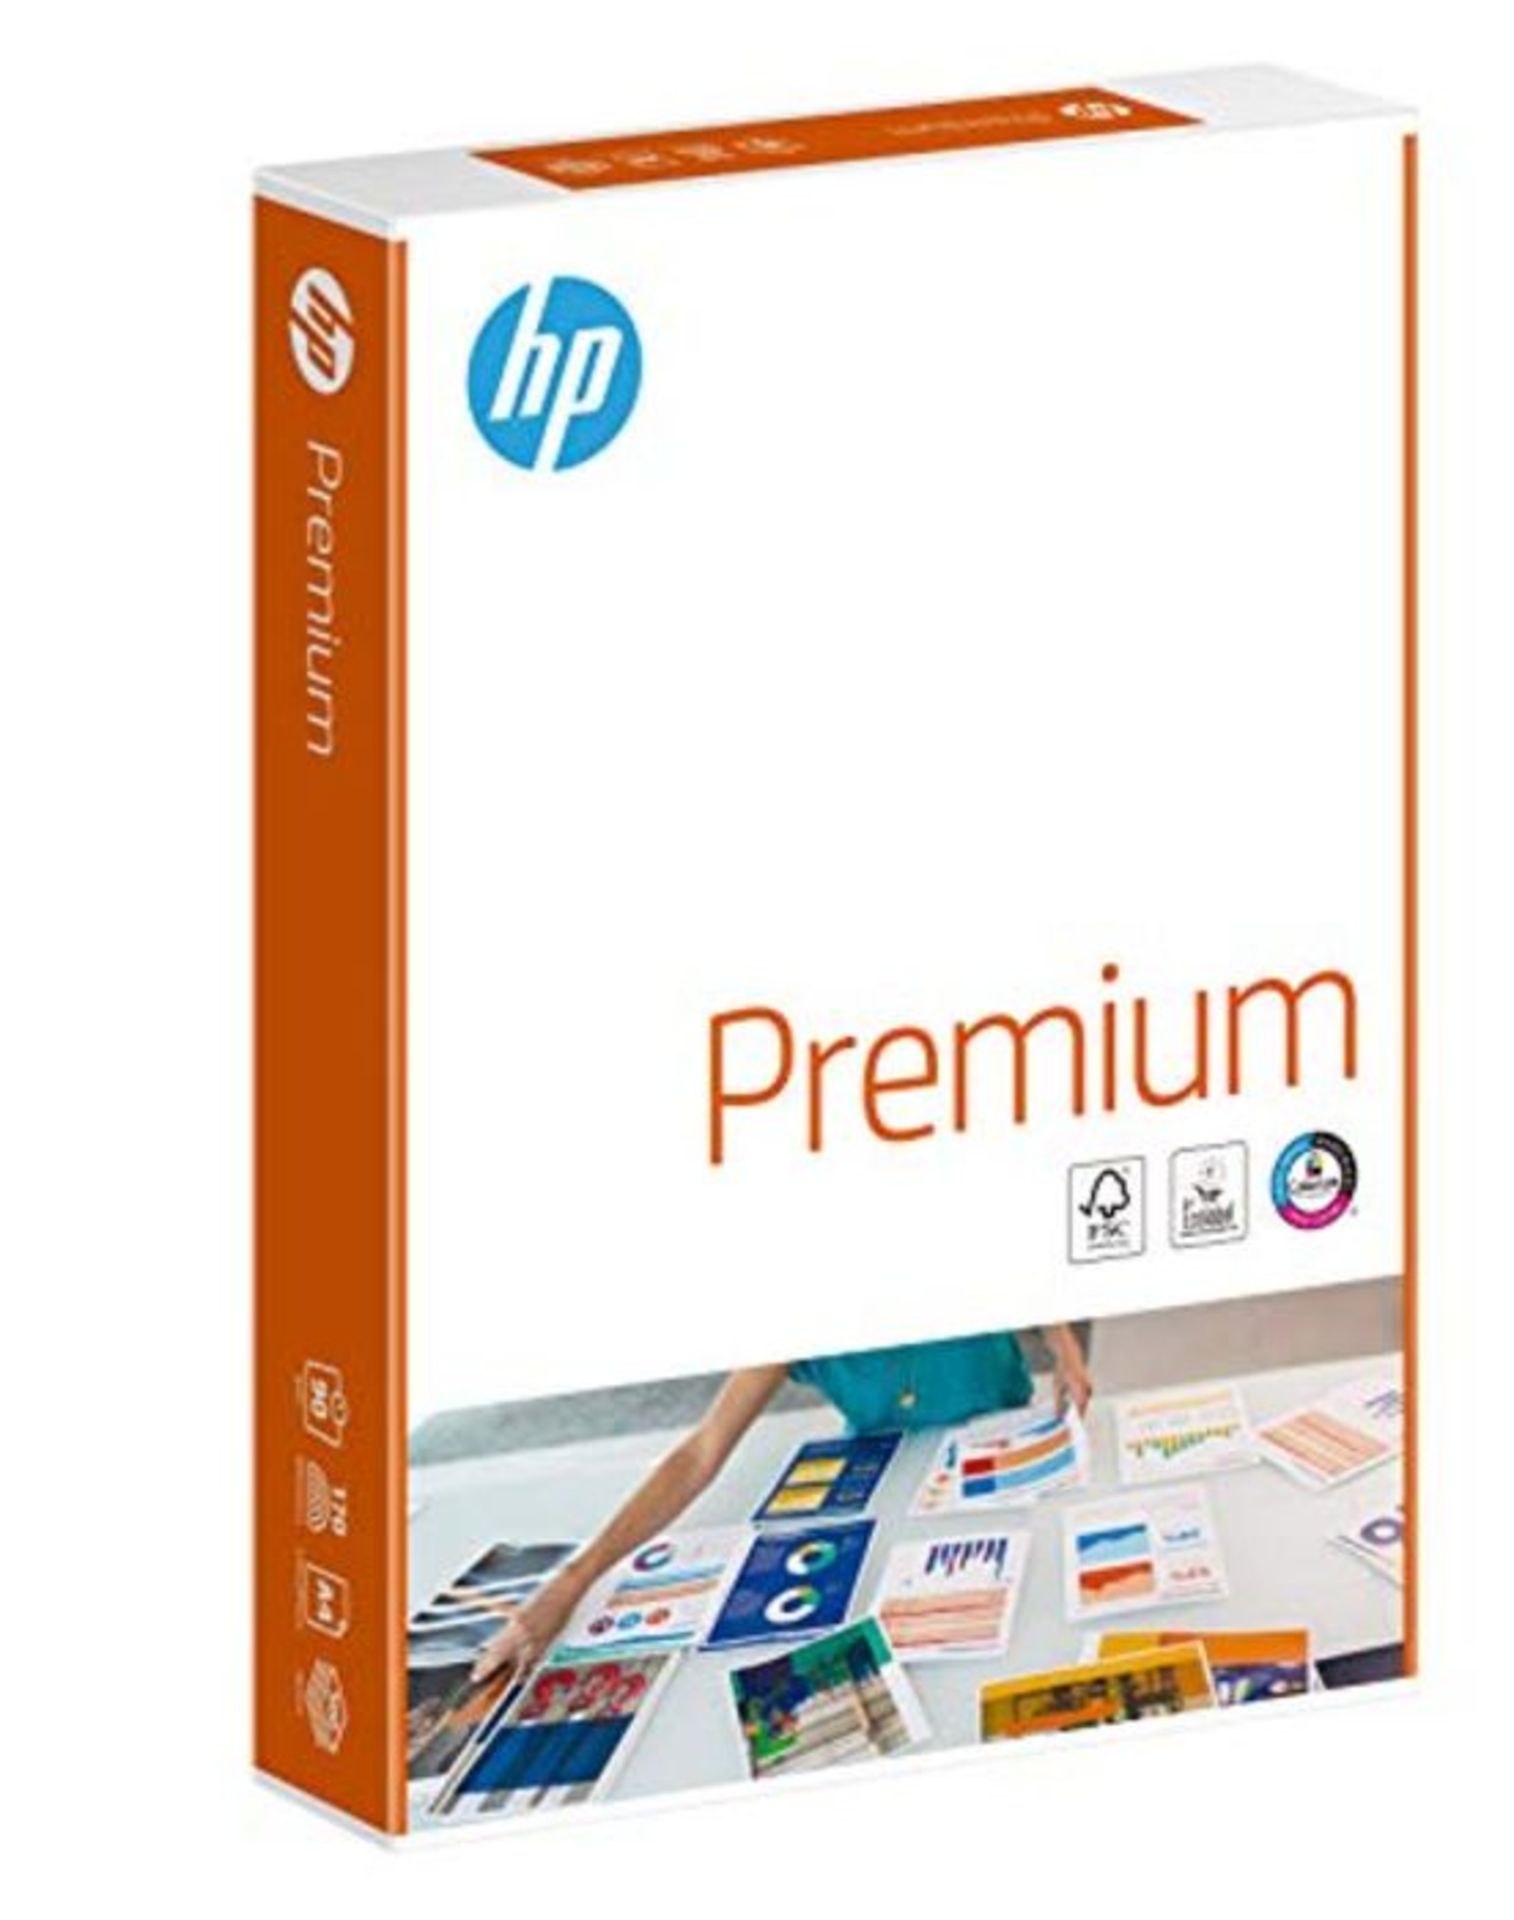 HP Papers CHP852 A4 90 gsm FSC Premium Paper, White